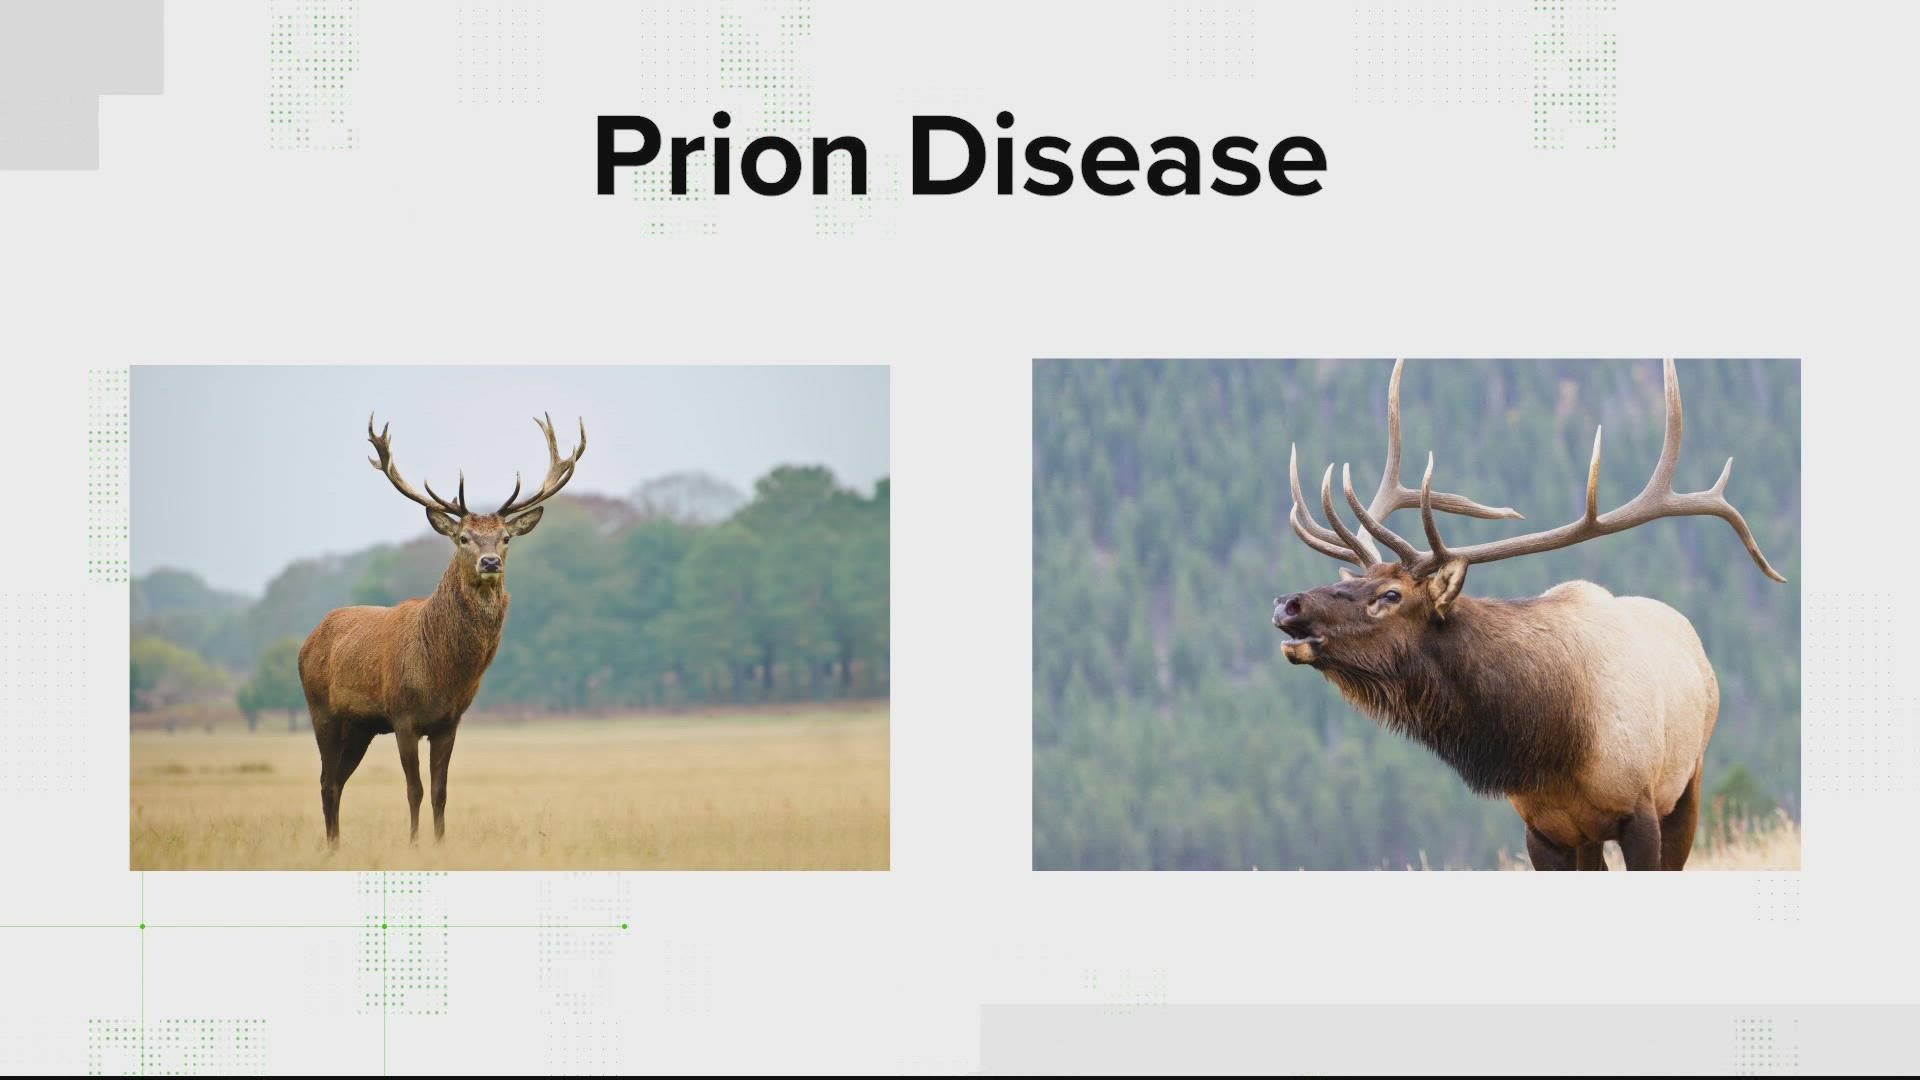 A deer in Fairfax tested positive for a contagious neurological disease related to mad cow. Now the CDC recommends hunters have game tested before bringing it home.